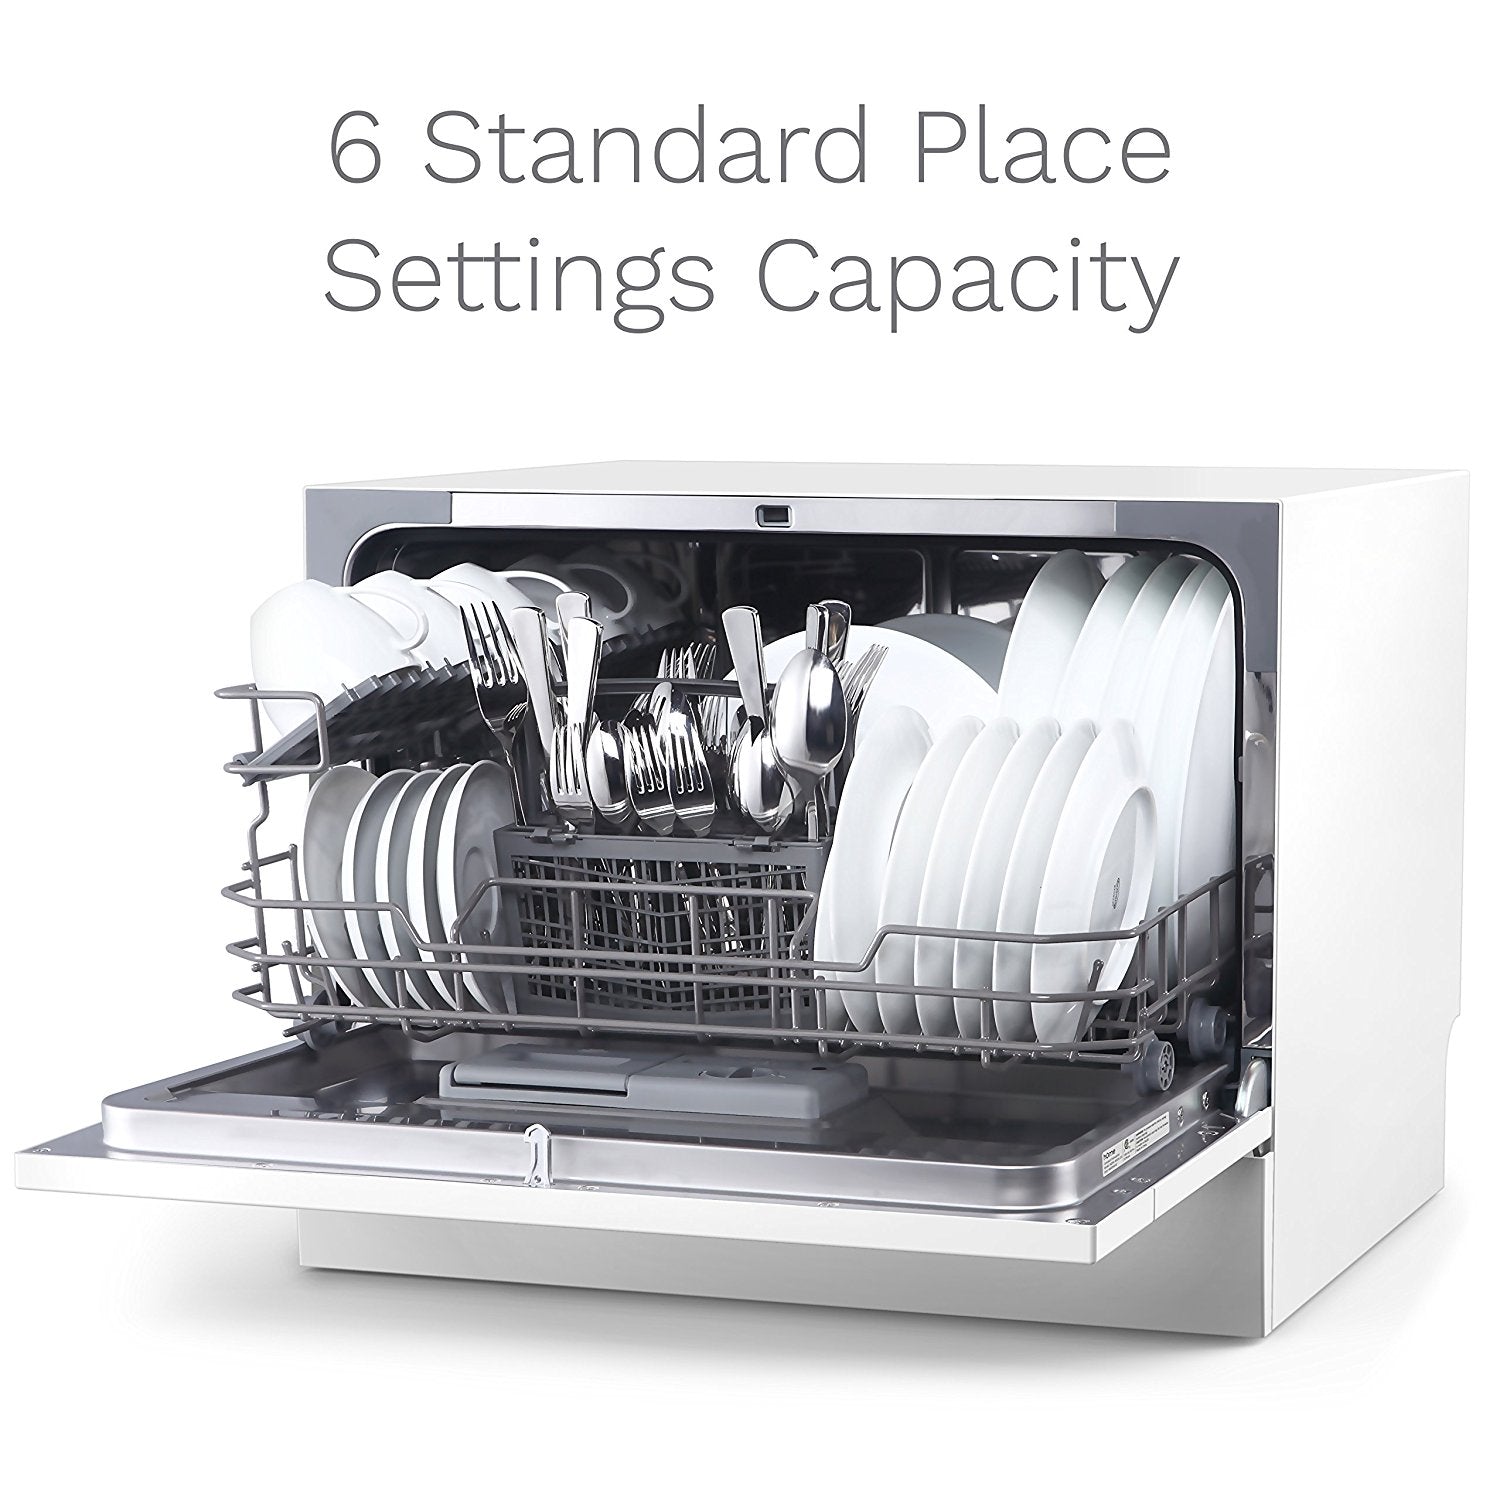 6 standard place setting capacity 